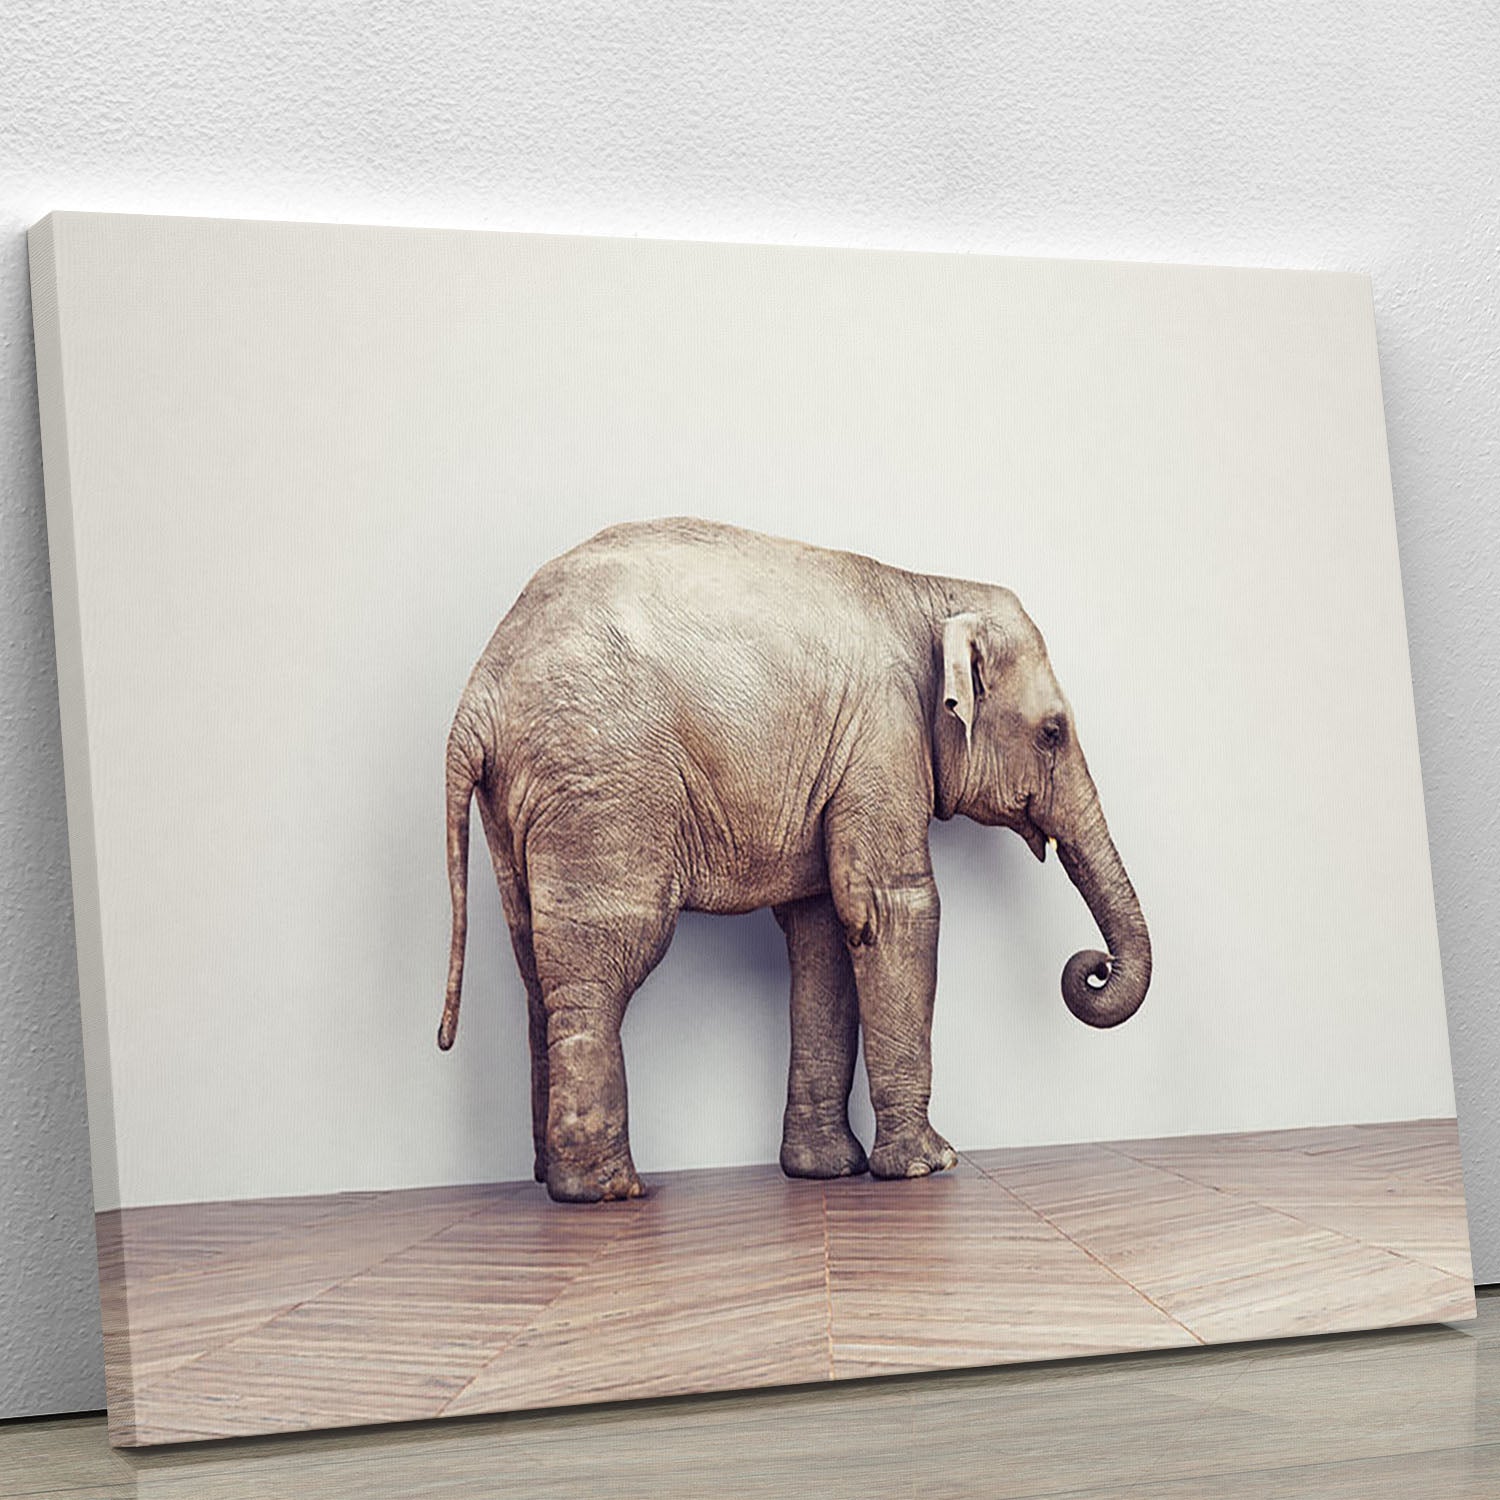 An elephant calm in the room near white wall. Creative concept Canvas Print or Poster - Canvas Art Rocks - 1